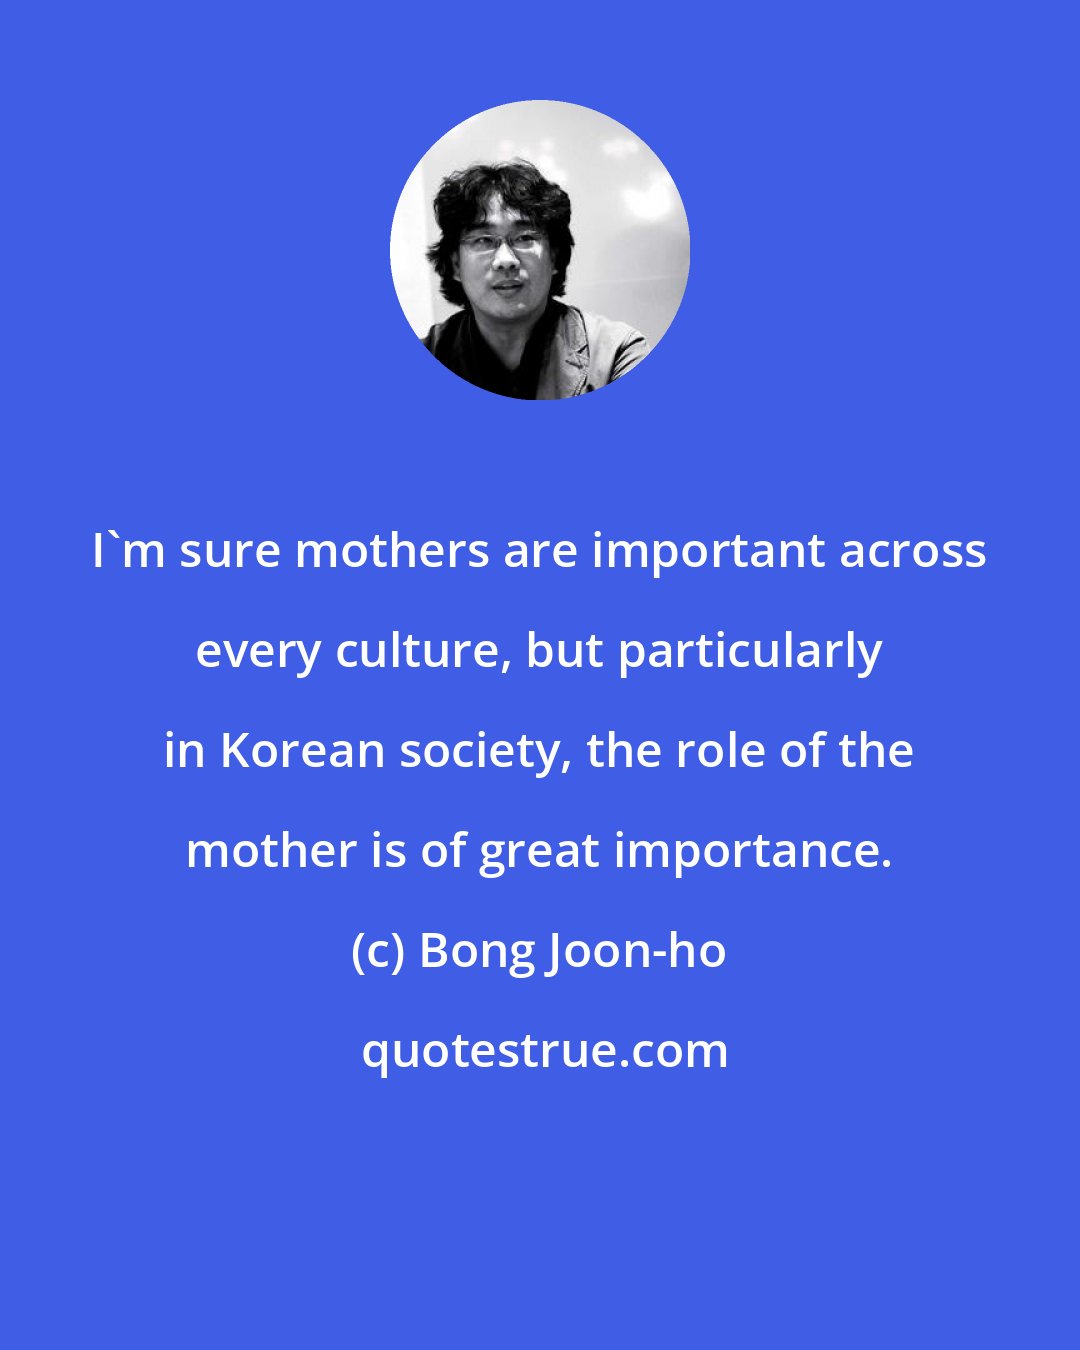 Bong Joon-ho: I'm sure mothers are important across every culture, but particularly in Korean society, the role of the mother is of great importance.